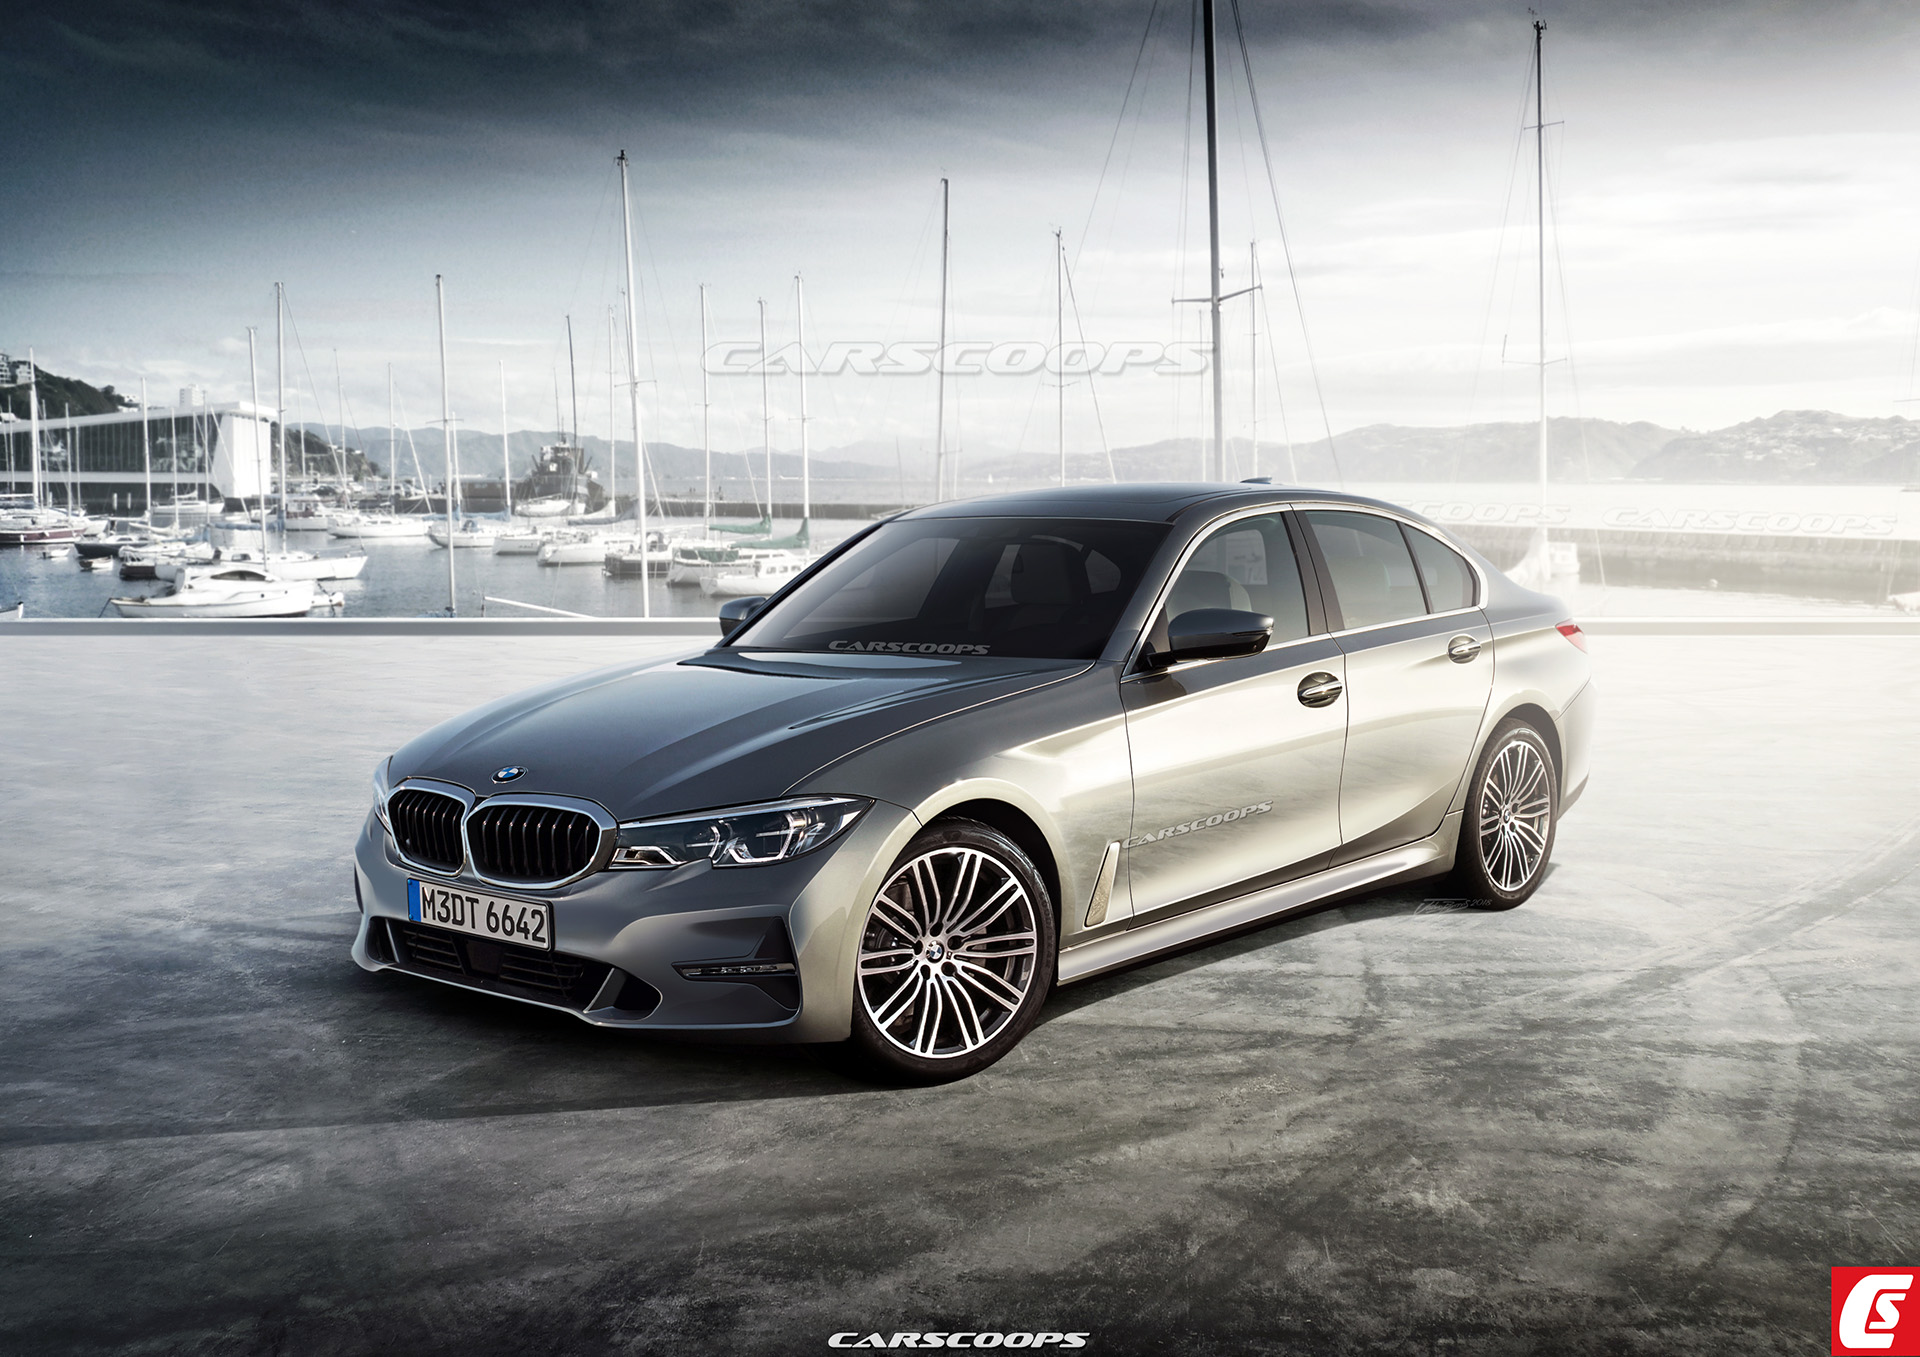 2018 - [BMW] Série 3 [G20/G21] - Page 8 2019-BMW-3-Series-Carscoops-2